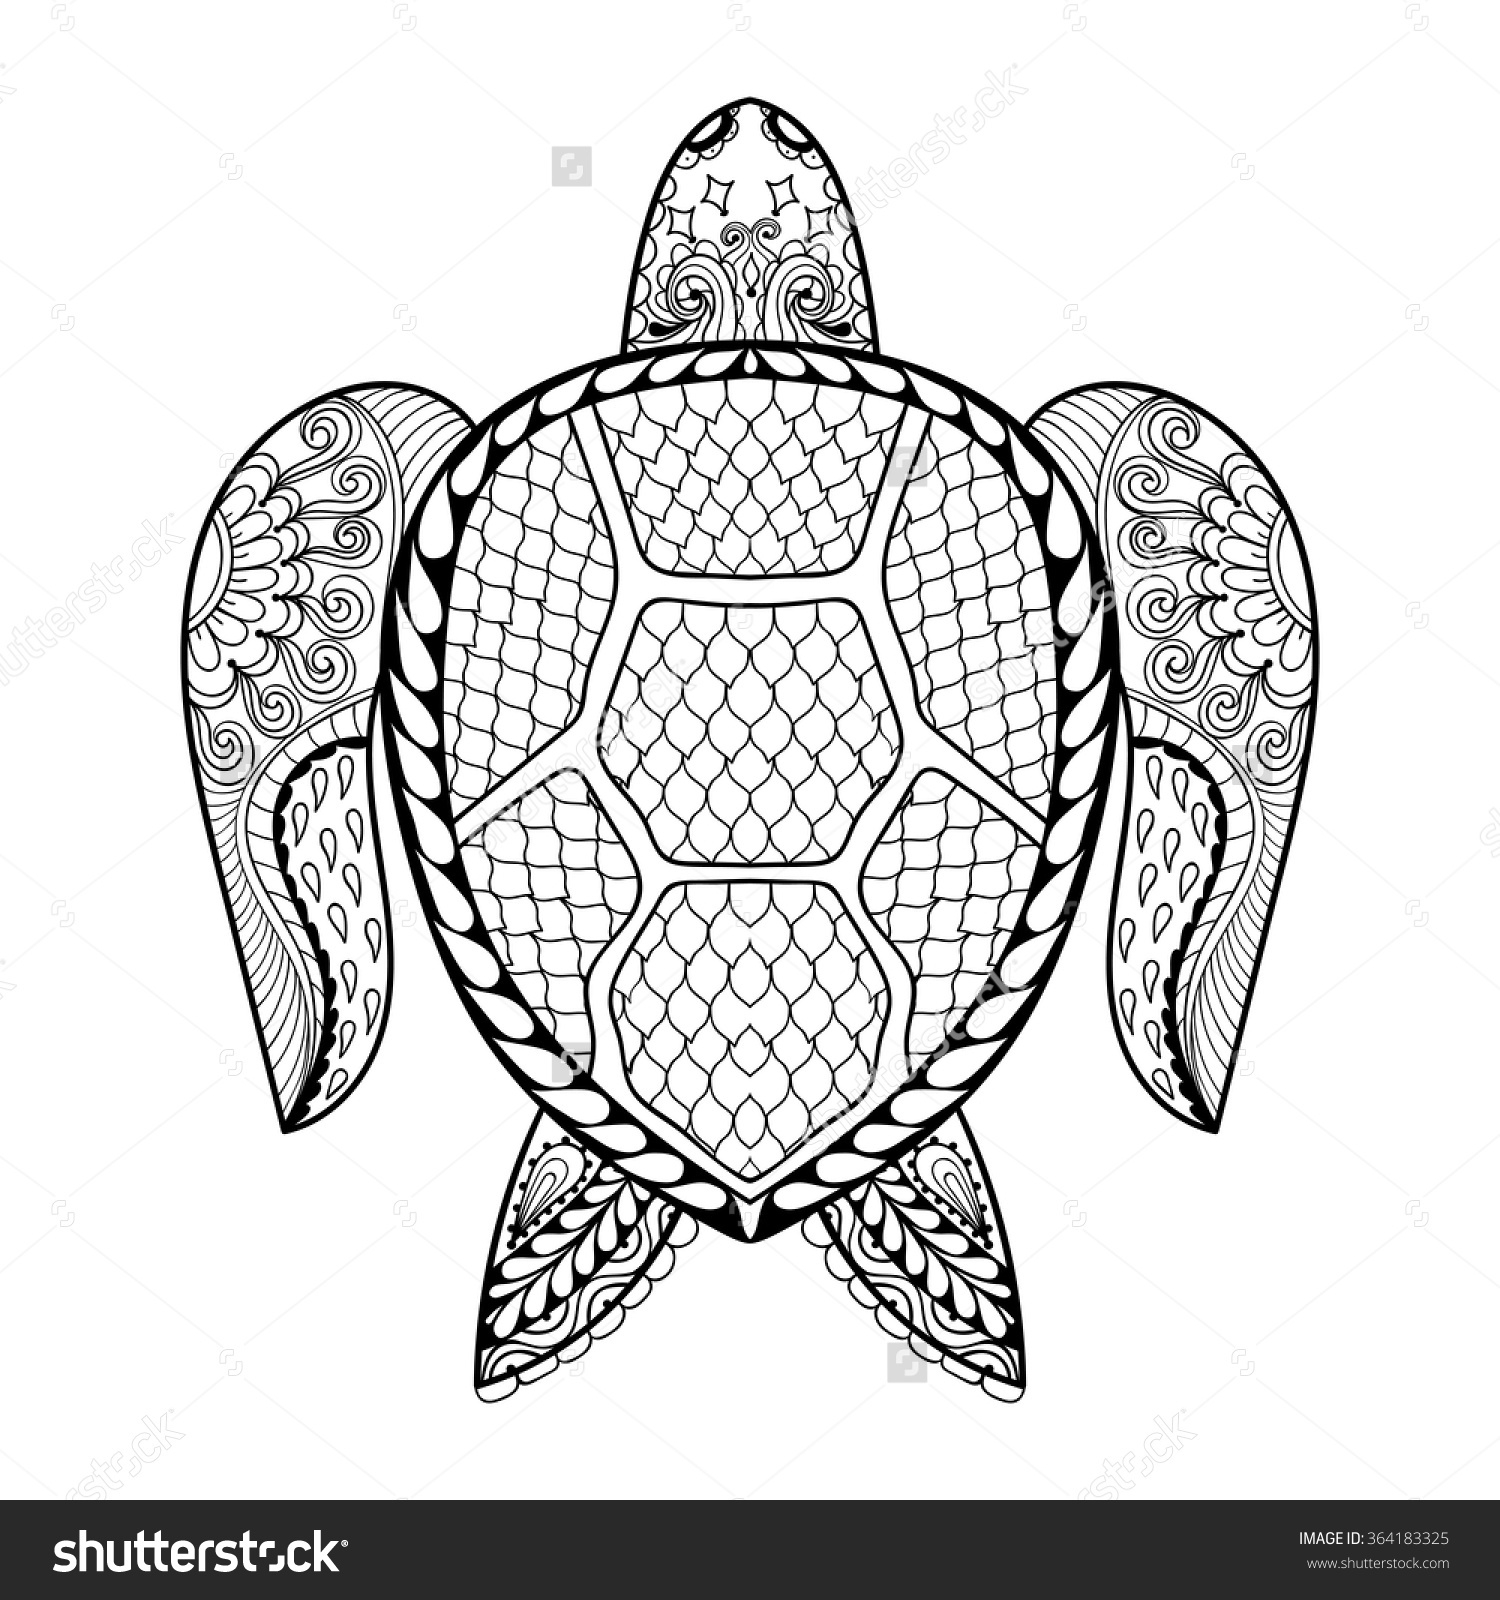 Turtle Coloring Pages For Adults at GetColorings.com | Free printable